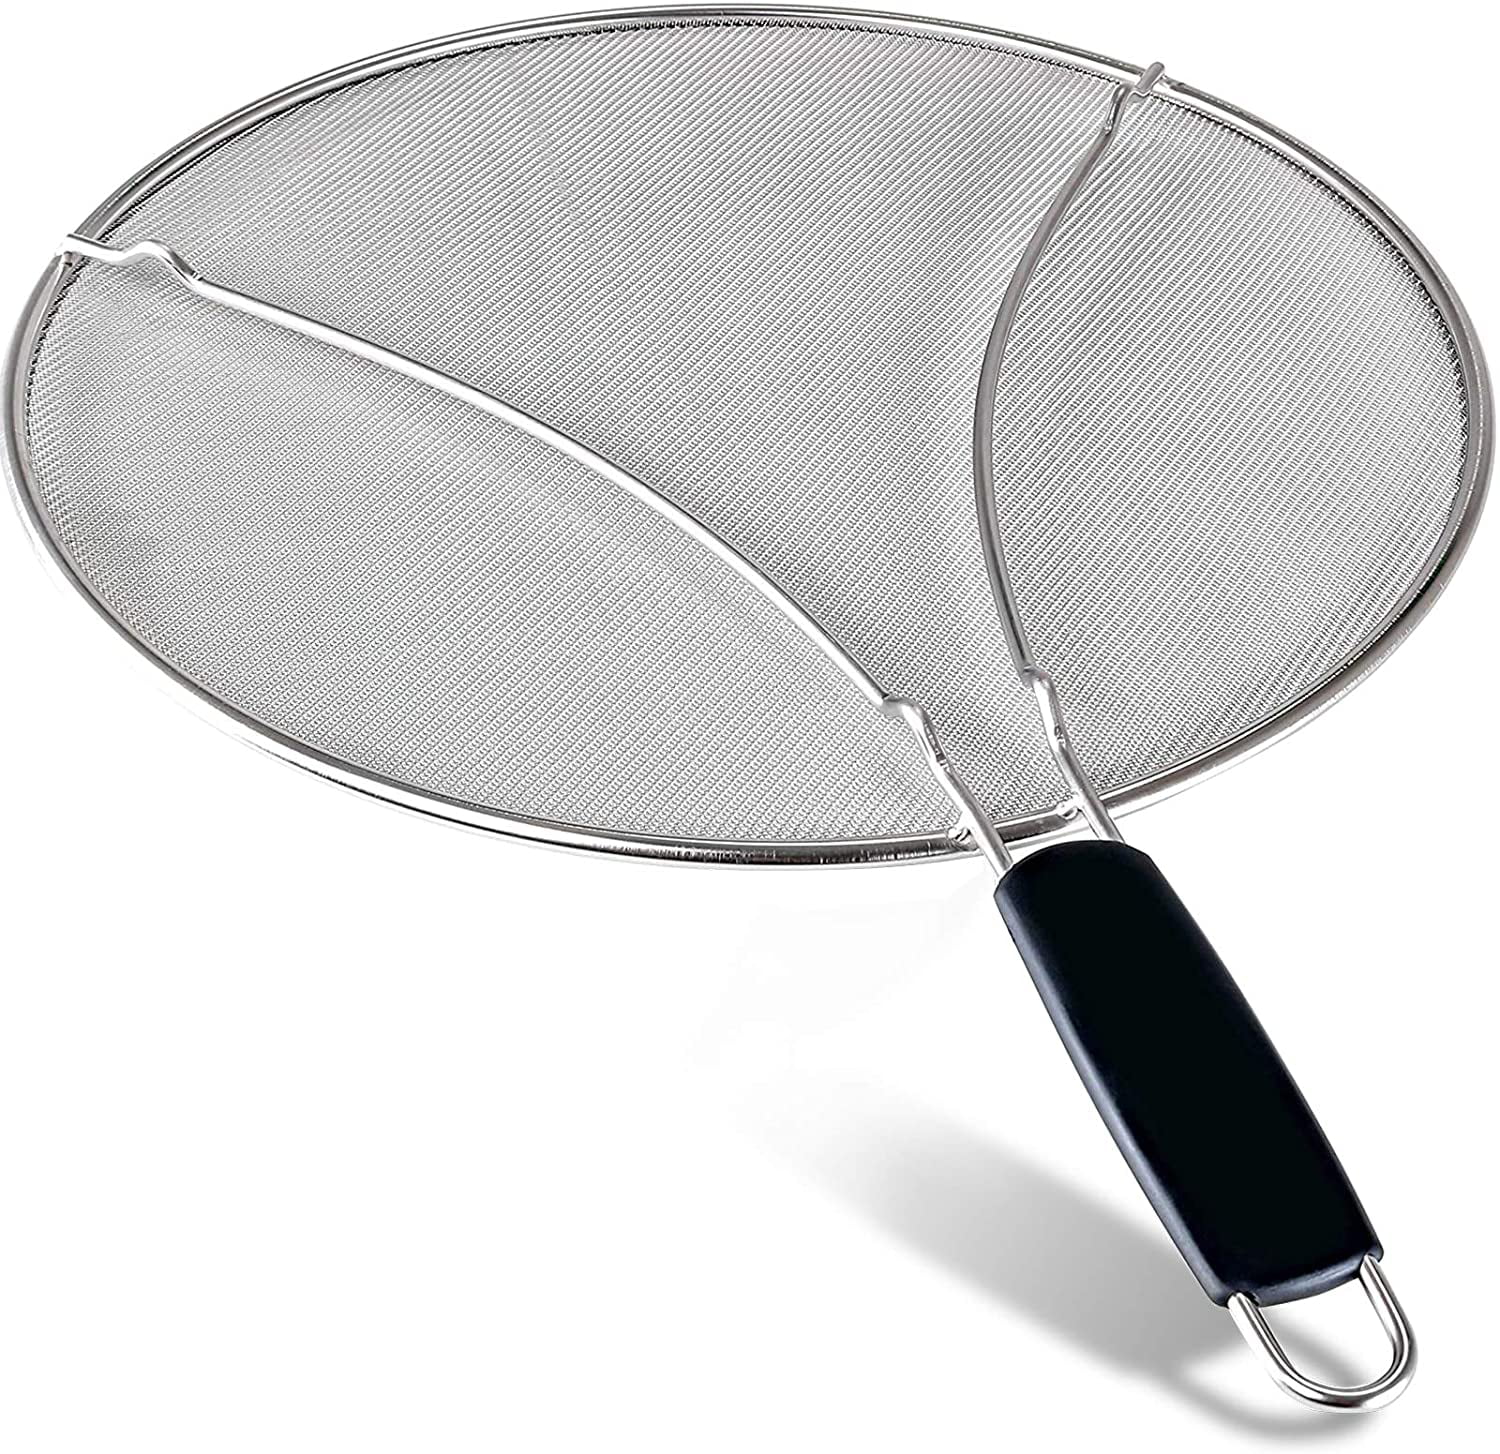 DPNY Pack Of 3 Kitchen Frying Pan Splatter Screen Cover Guard Protective Lid Mesh Fat 